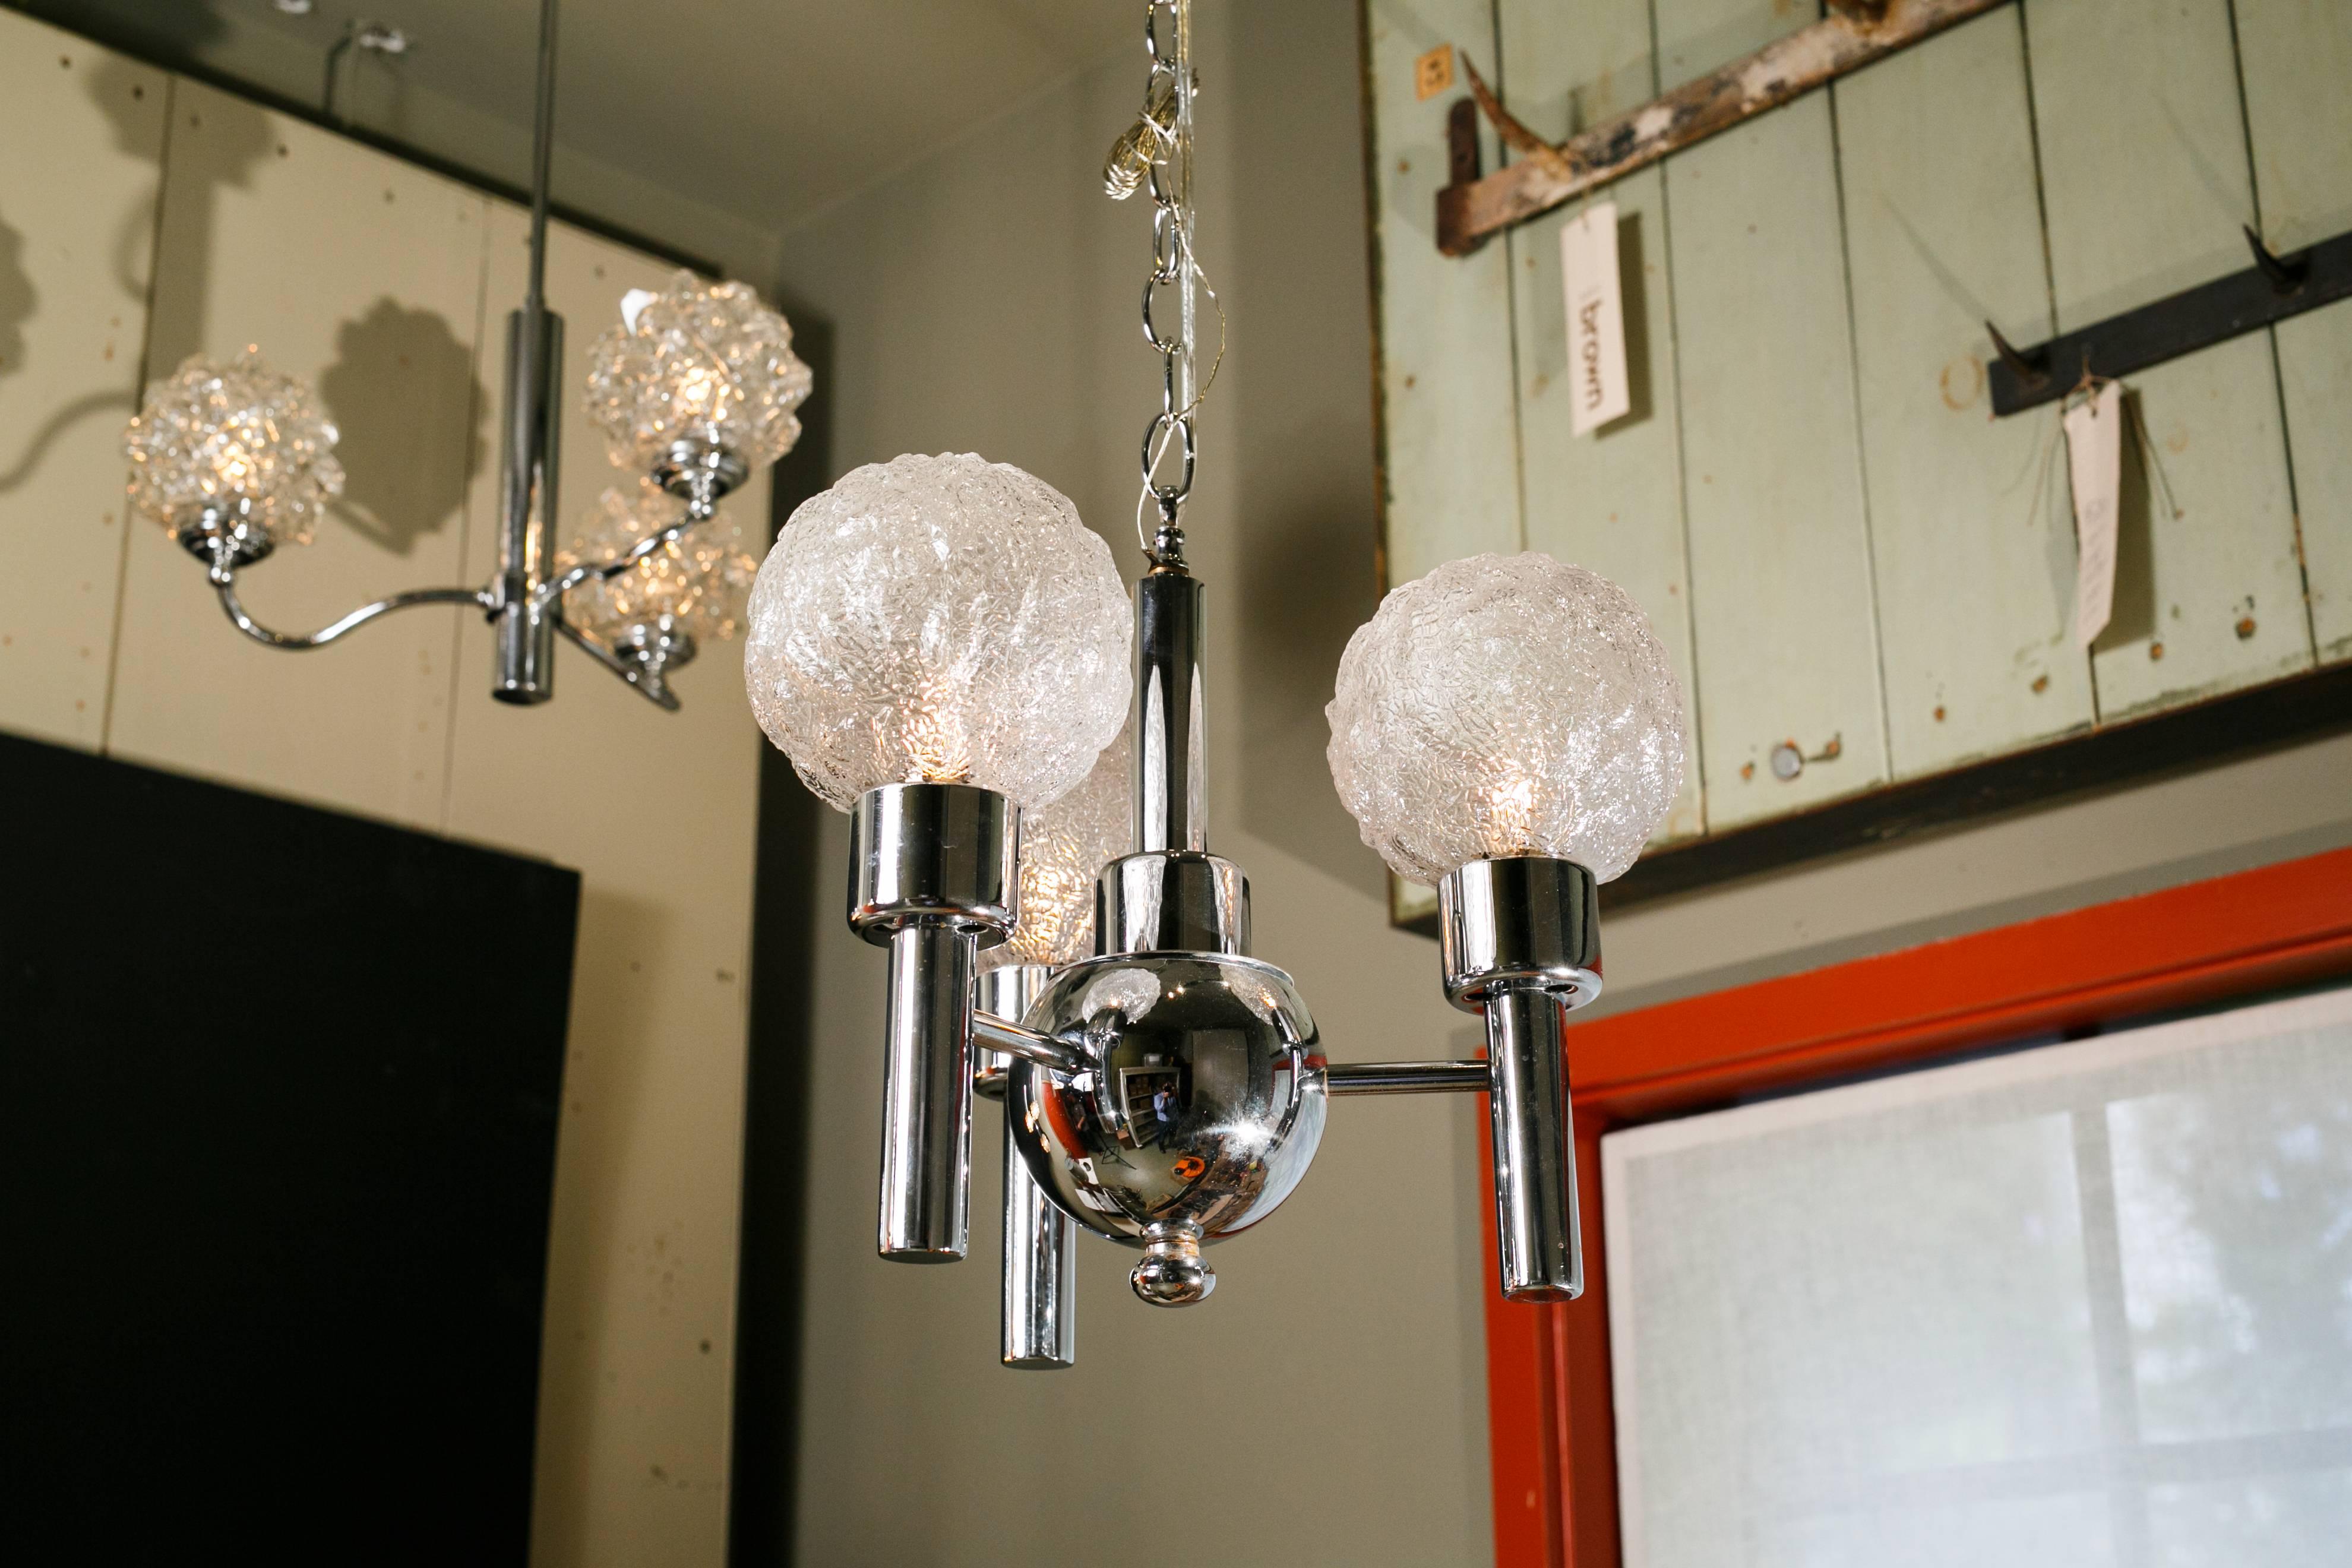 Vintage European chrome and textured Limburg glass light with three candelabra sockets. Newly rewired with all UL listed parts. Globes have an interesting texture and shape. Comes with matching chain and canopy.